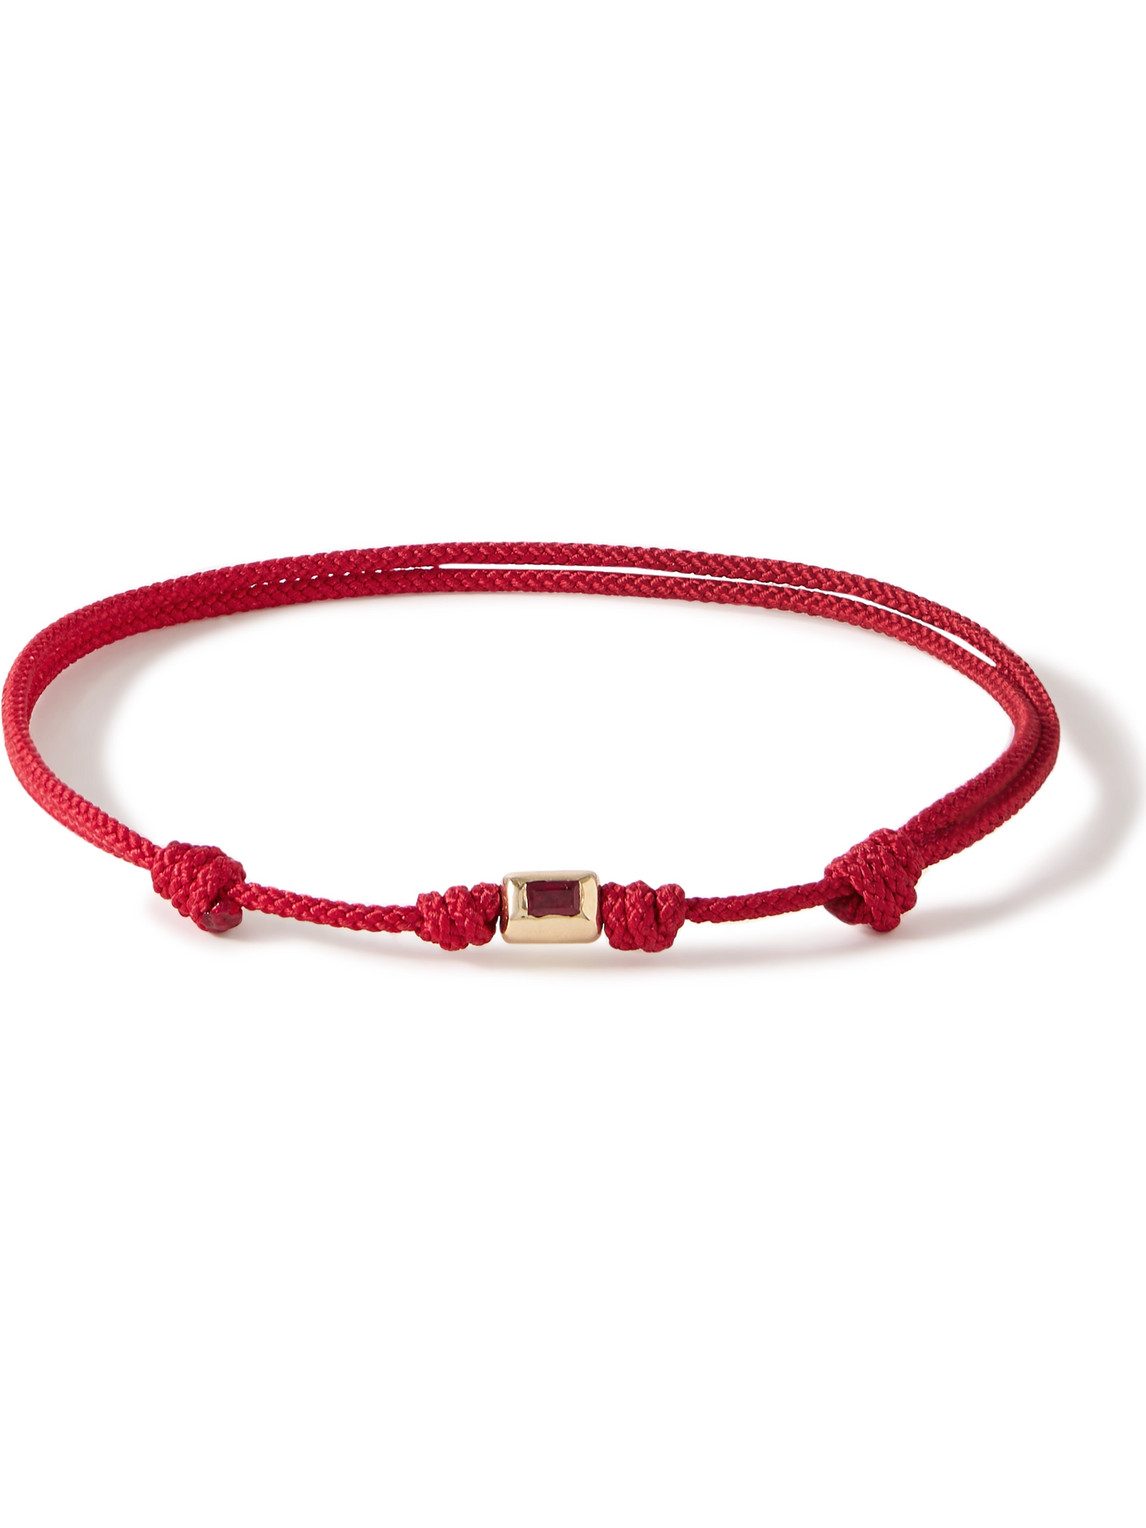 Luis Morais Gold, Ruby And Cord Bracelet In Red